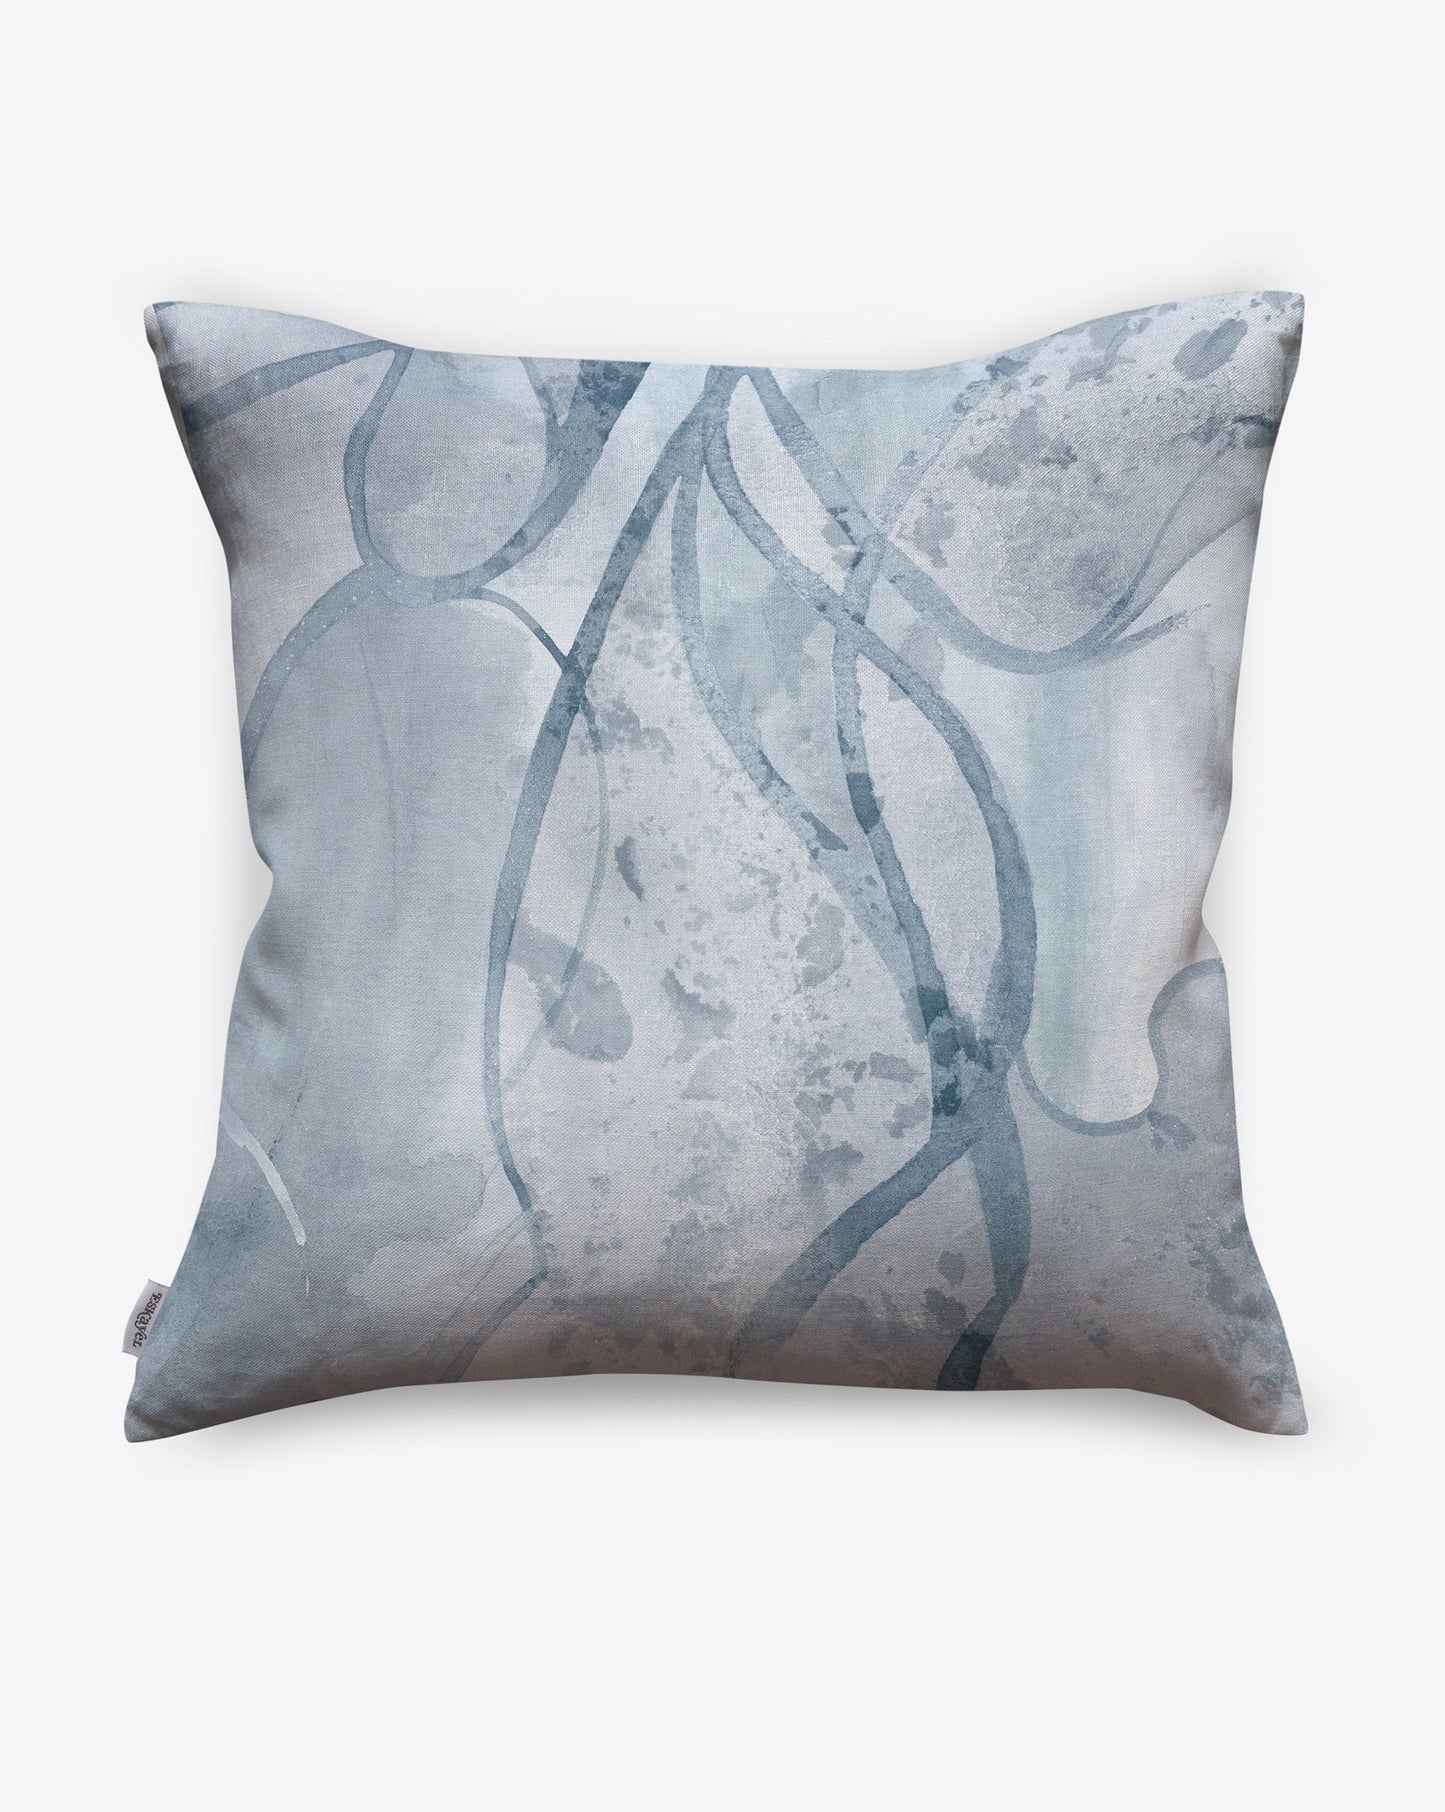 Lapis is a blue colorway used in Eskayel Hibiscus Lily linen pillows.    